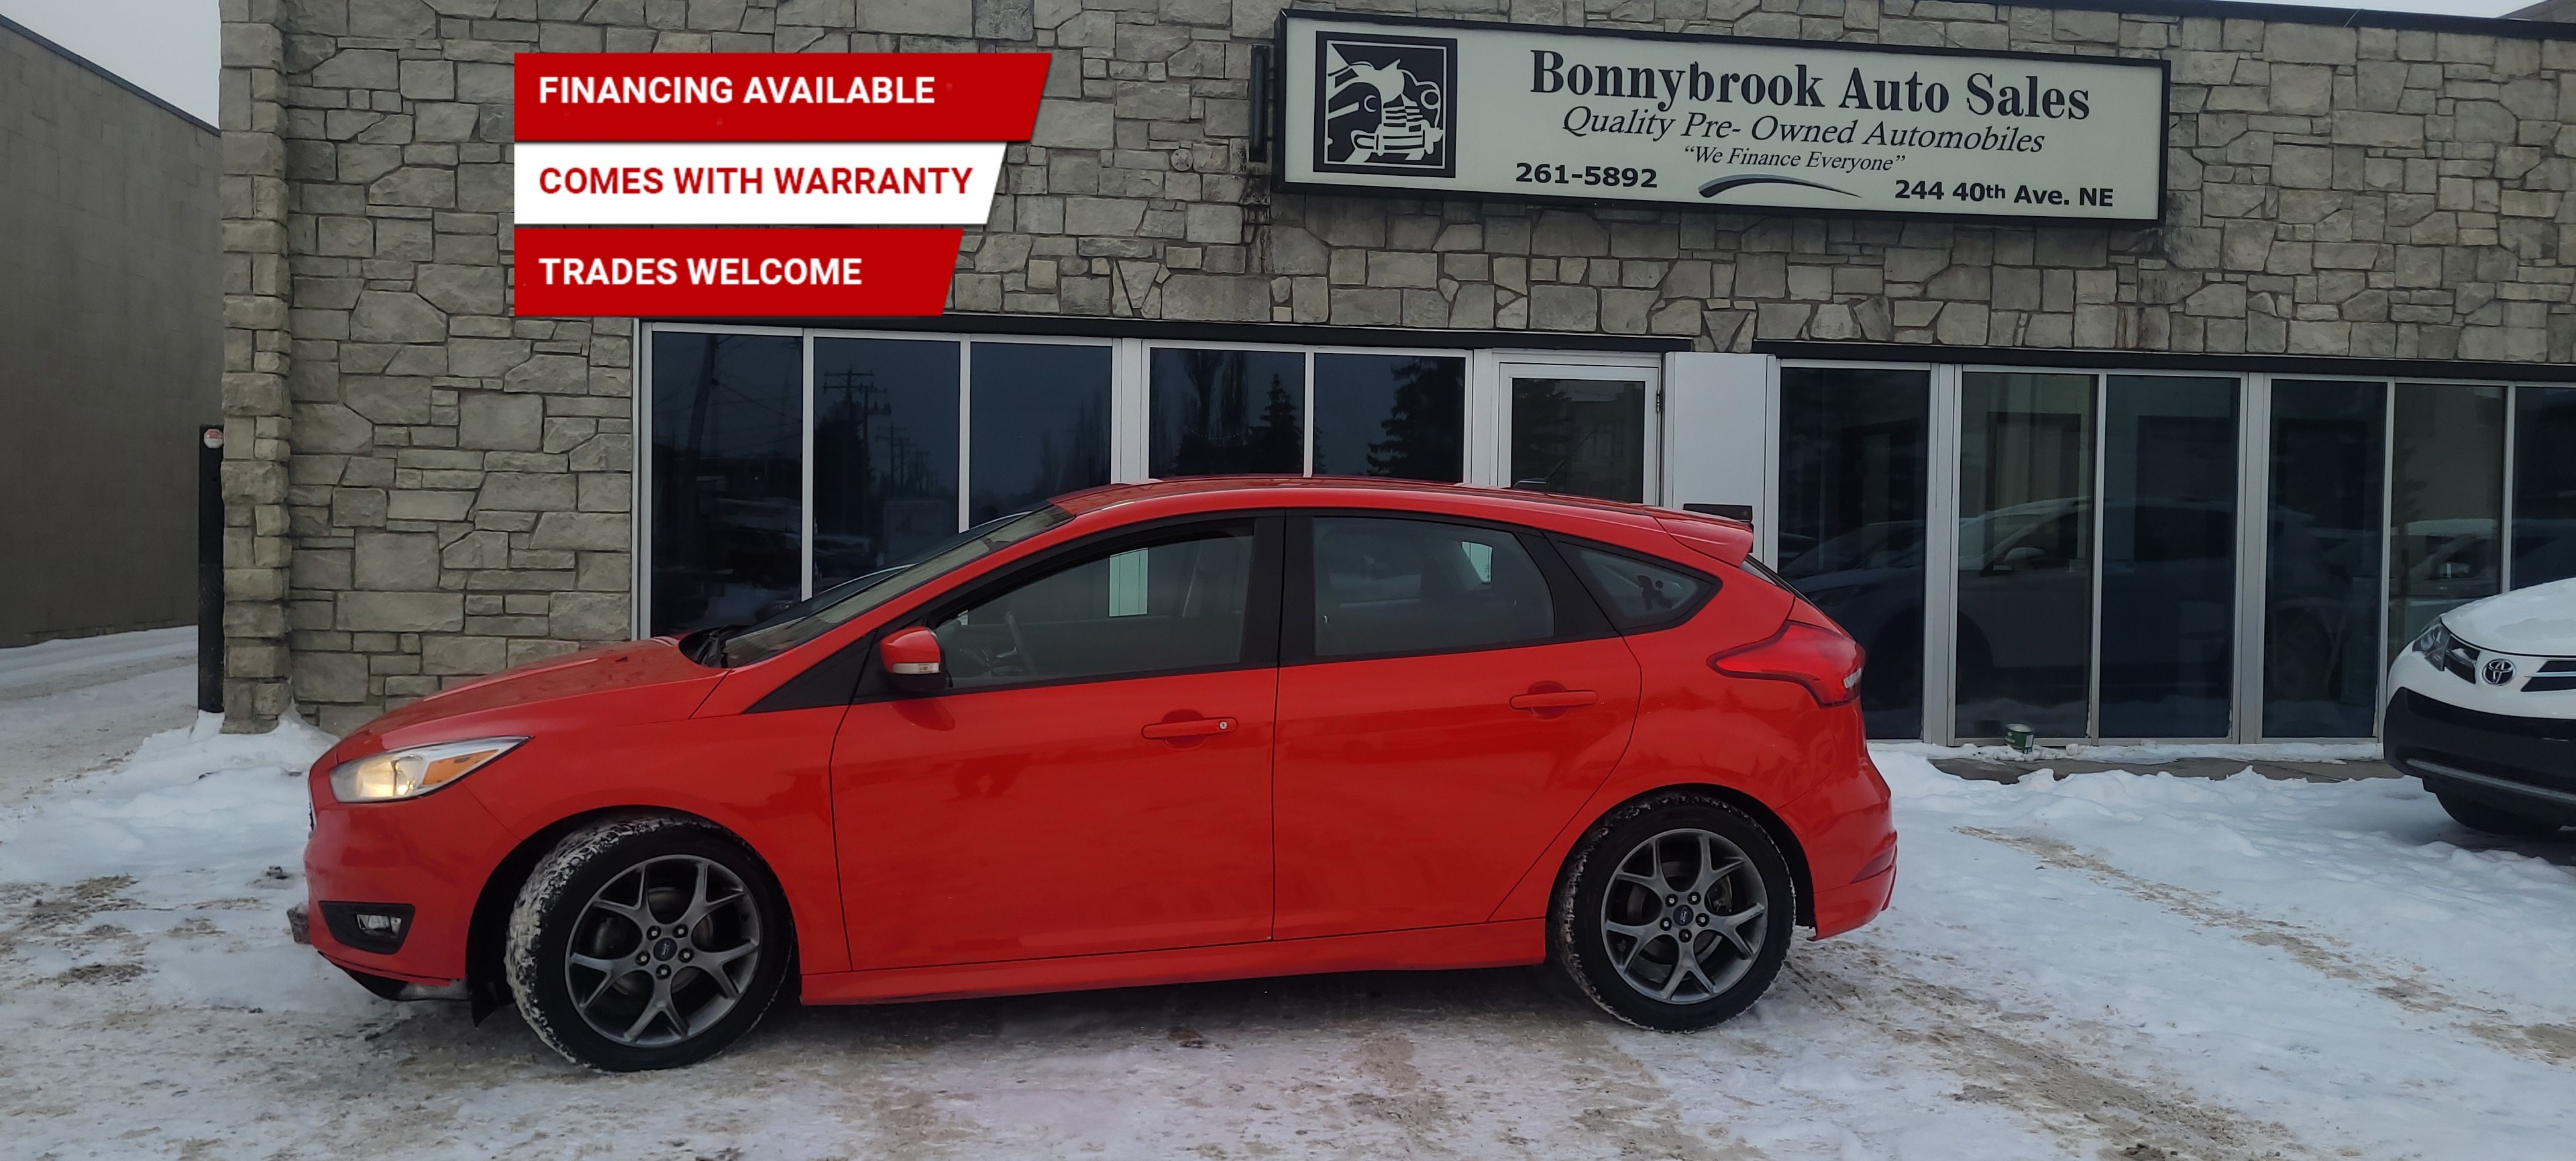 2017 Ford Focus 5dr HB SE/Heated Seats/Bluetooth/Backup camera